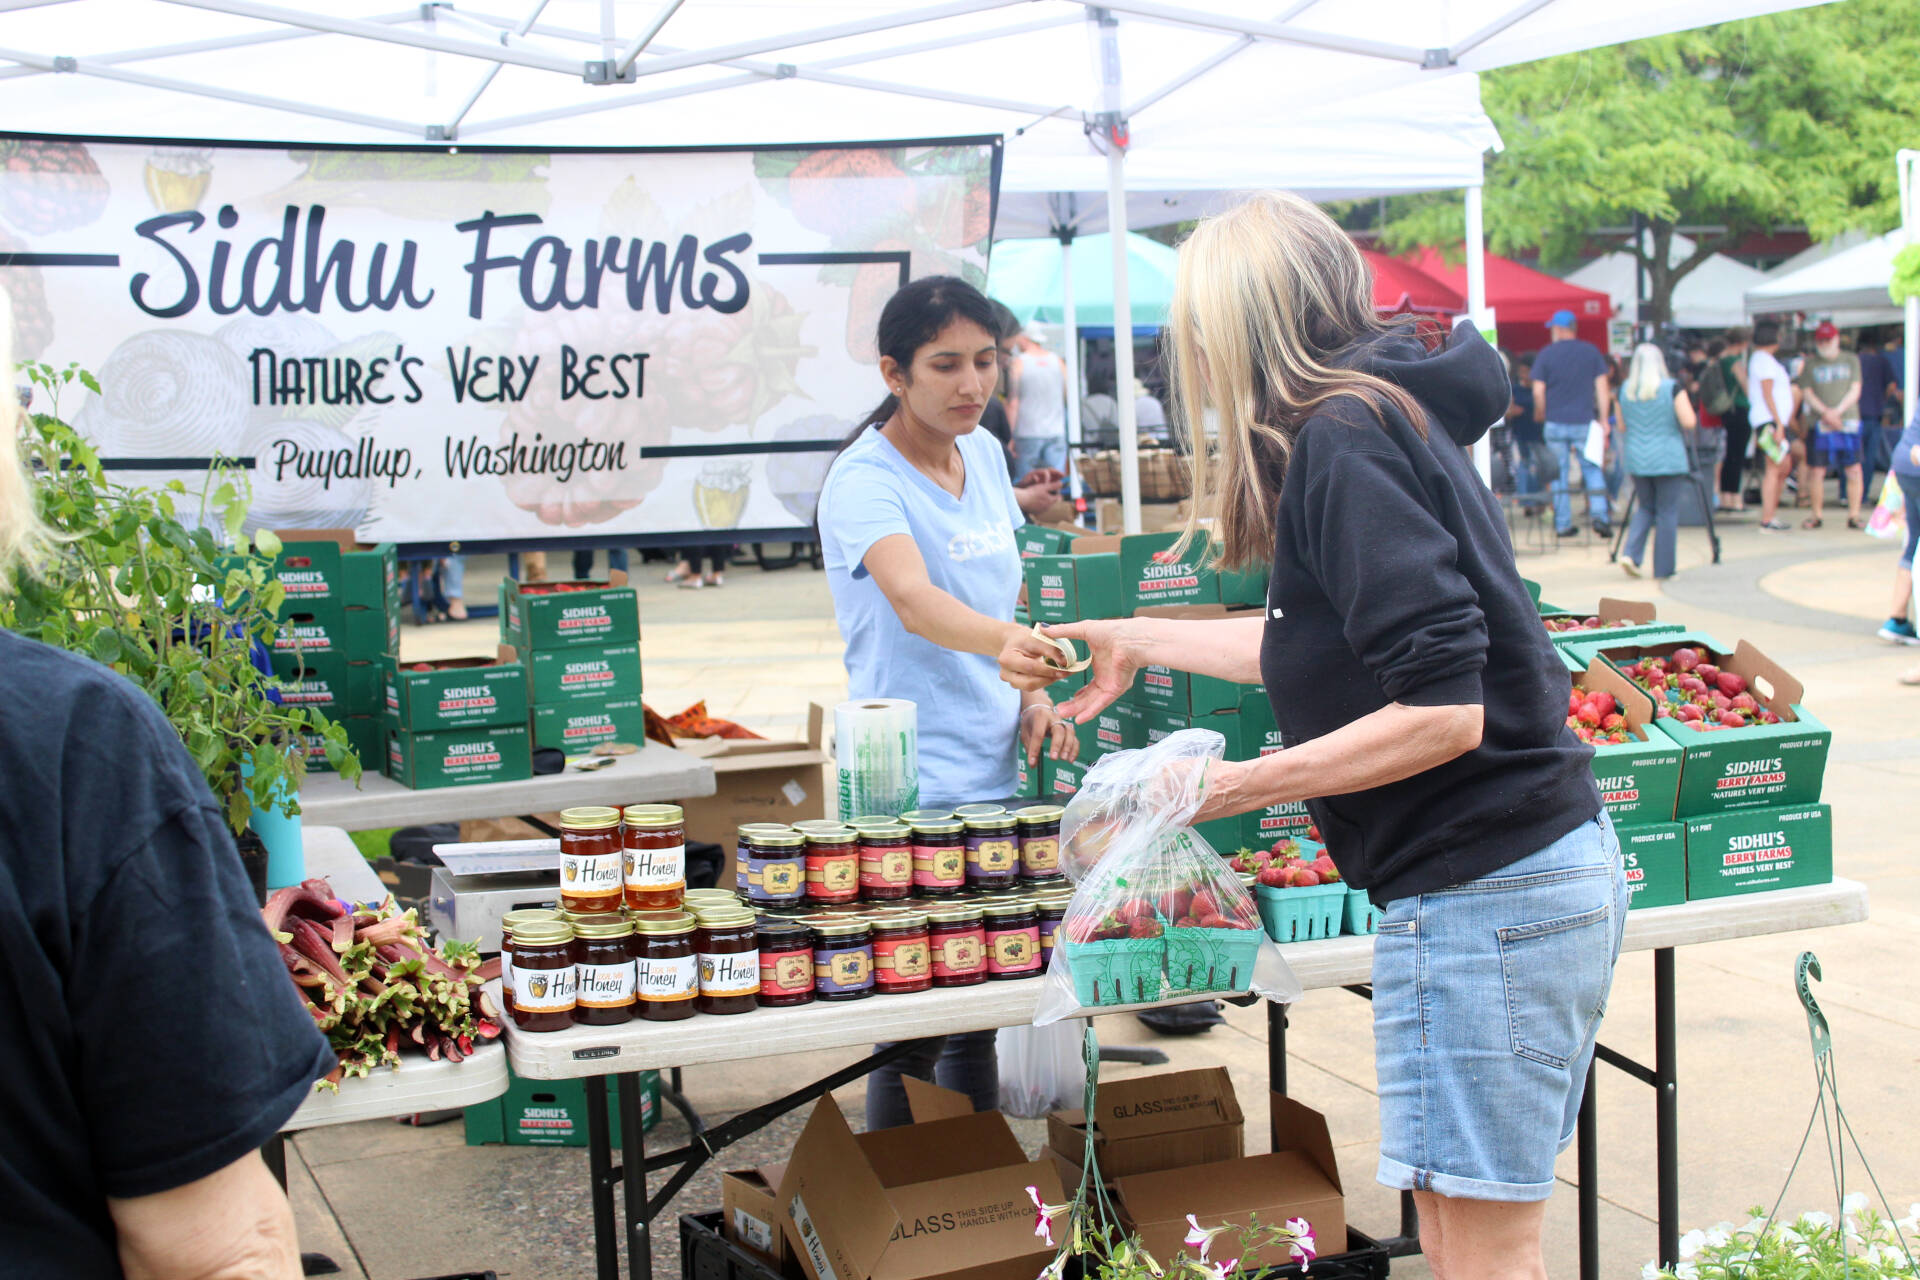 A customer buys strawberries from Sidhu Farms at the Renton Farmers Market. File photo
A customer buys strawberries from Sidhu Farms at the Renton Farmers Market. File photo